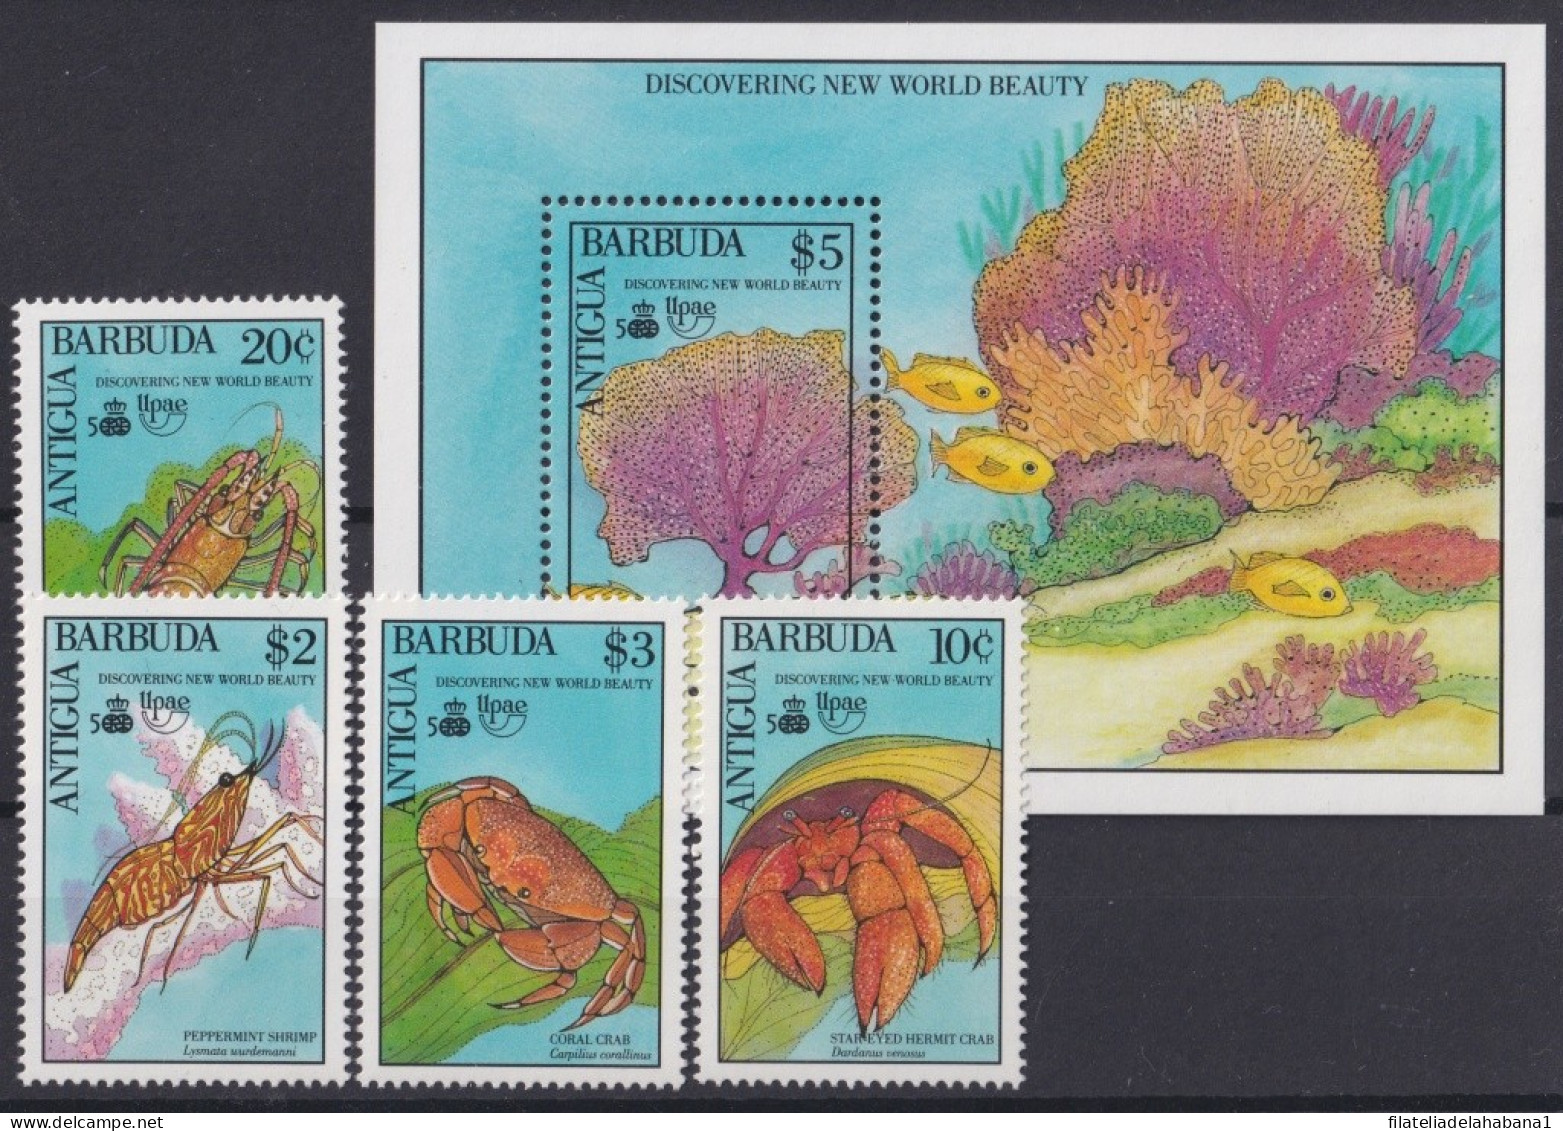 F-EX46037 ANTIGUA BARBUDA MNH 1990 UPAE DISCOVERY DISCOVERY CORAL LOBSTER.  - Schalentiere